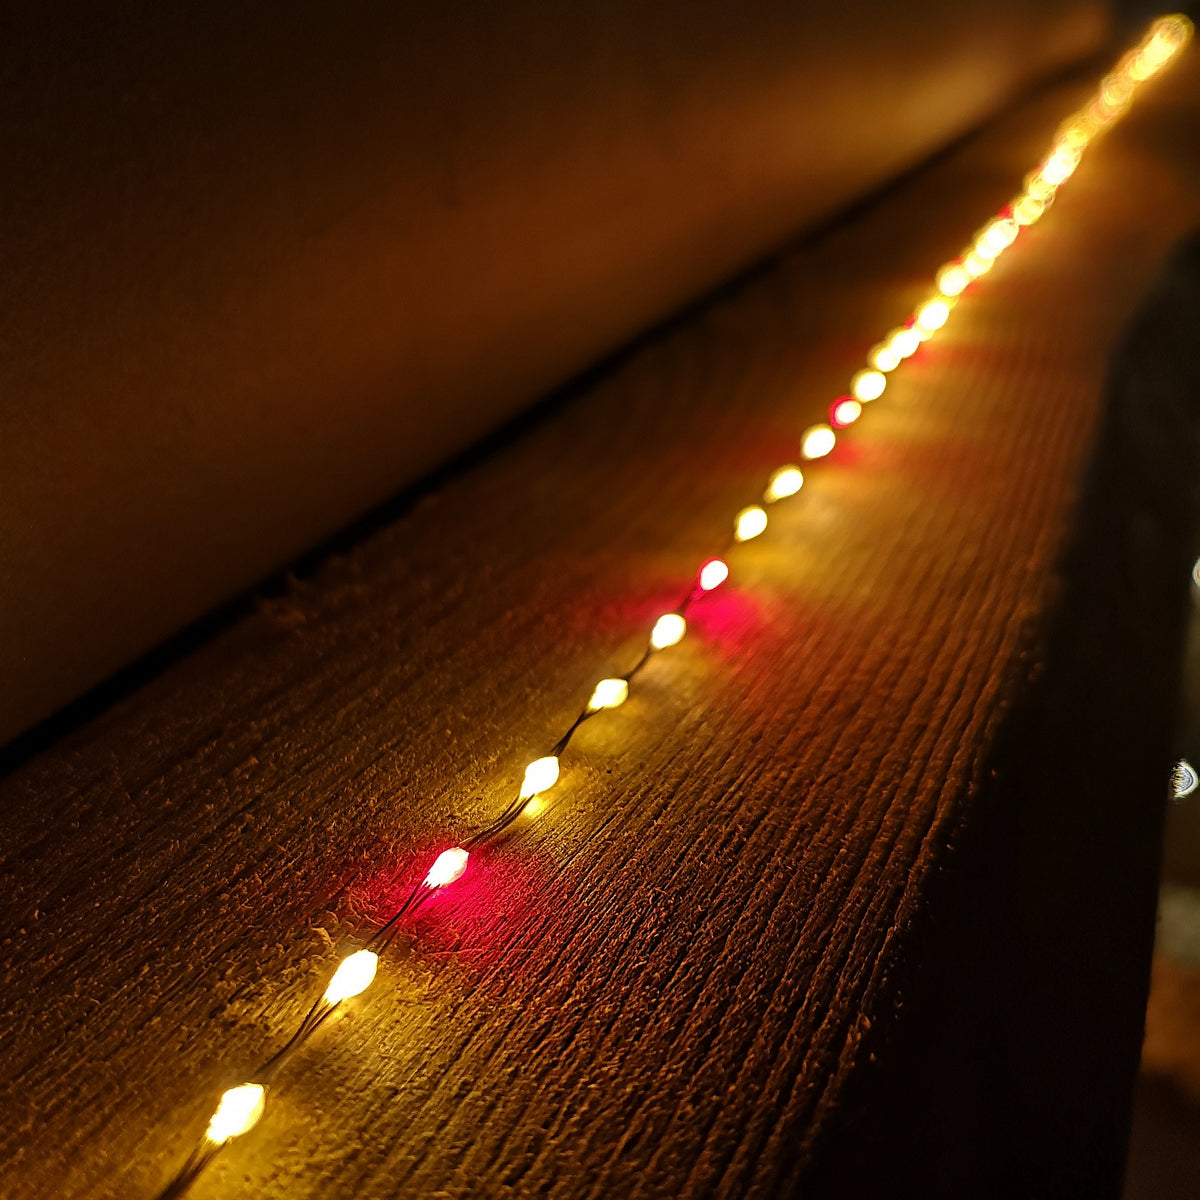 6.4m Compact MicroBrights Christmas Lights with 400 LEDs in Red & Vintage Gold